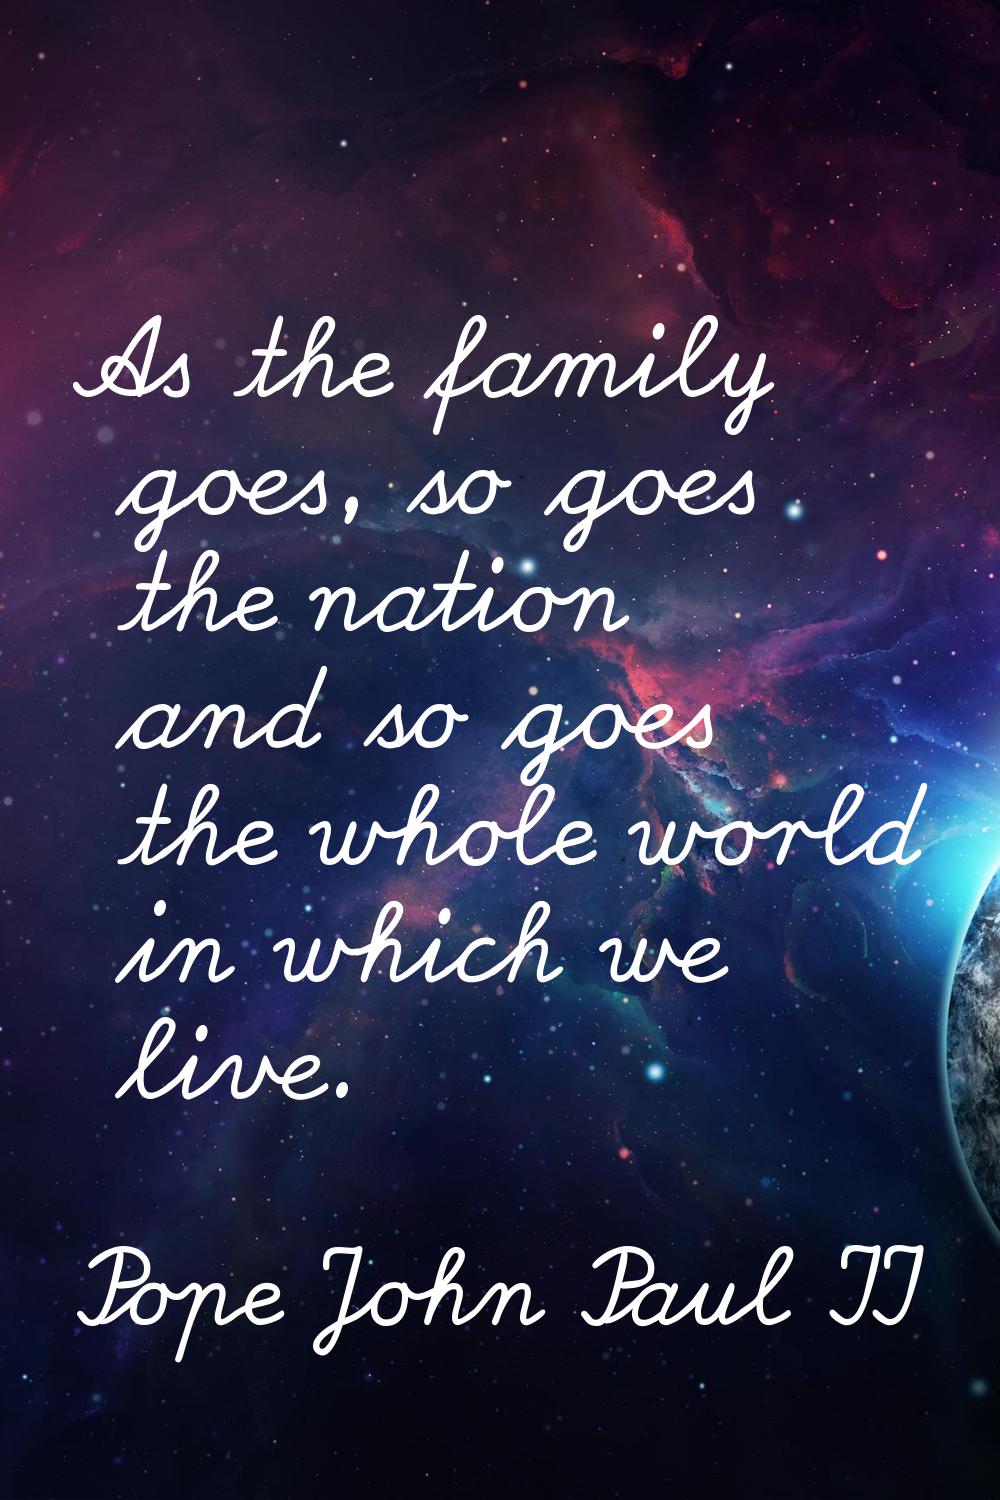 As the family goes, so goes the nation and so goes the whole world in which we live.